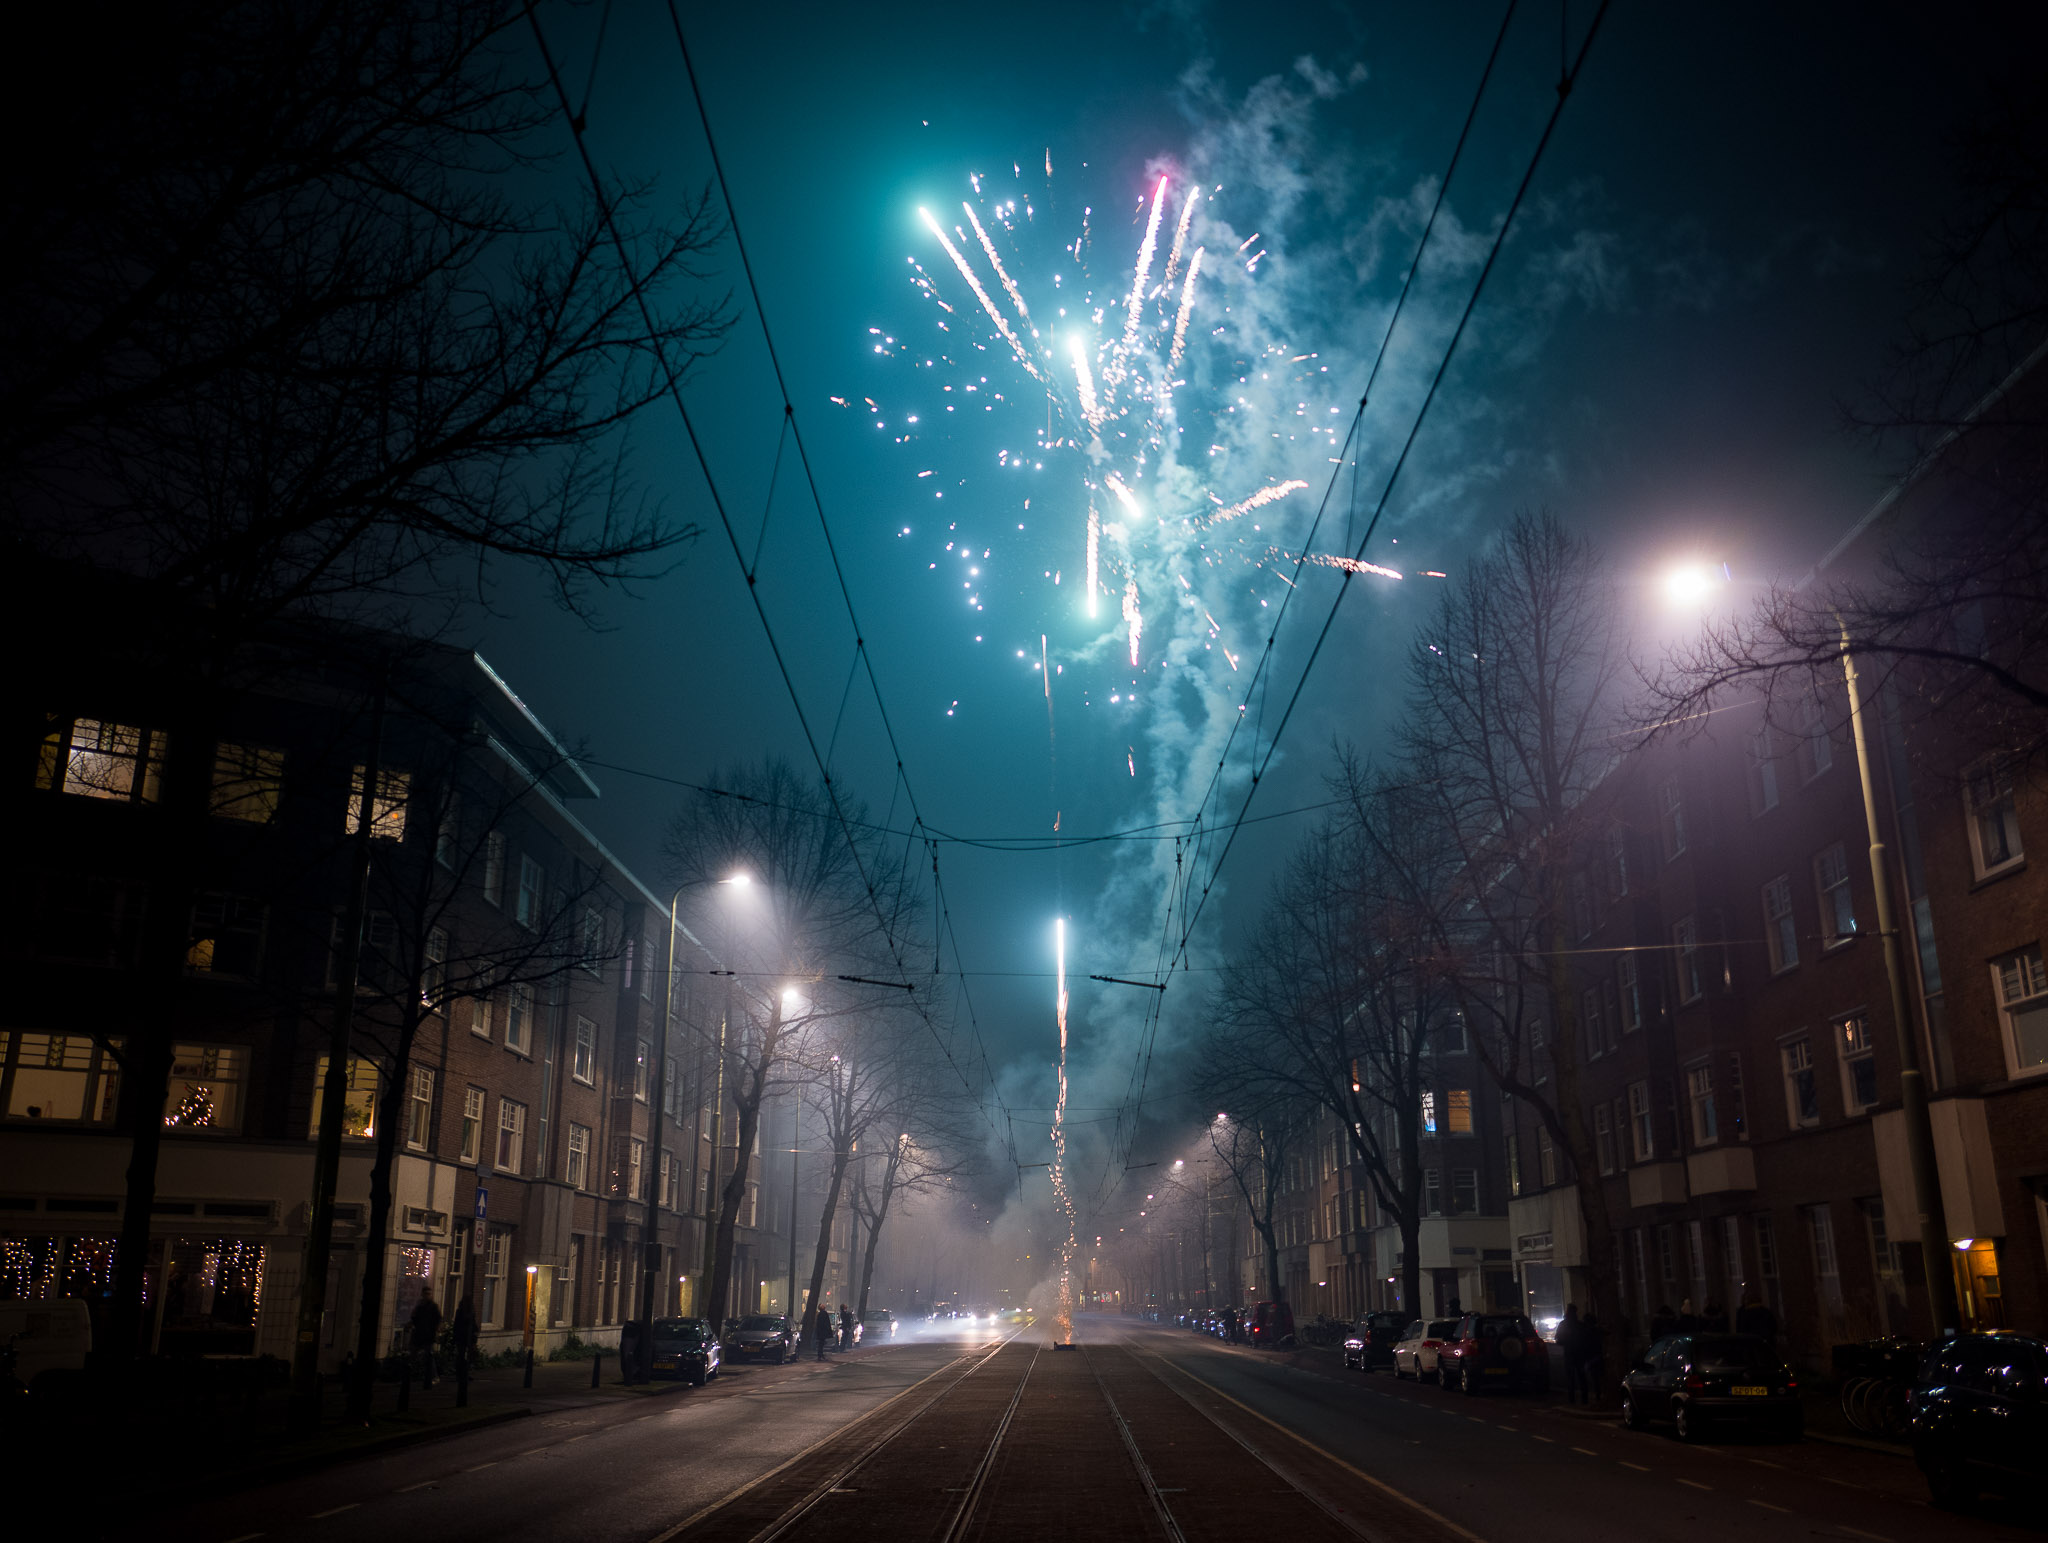 Fireworks launch from the middle of the street high into the sky as traffic passes by. 